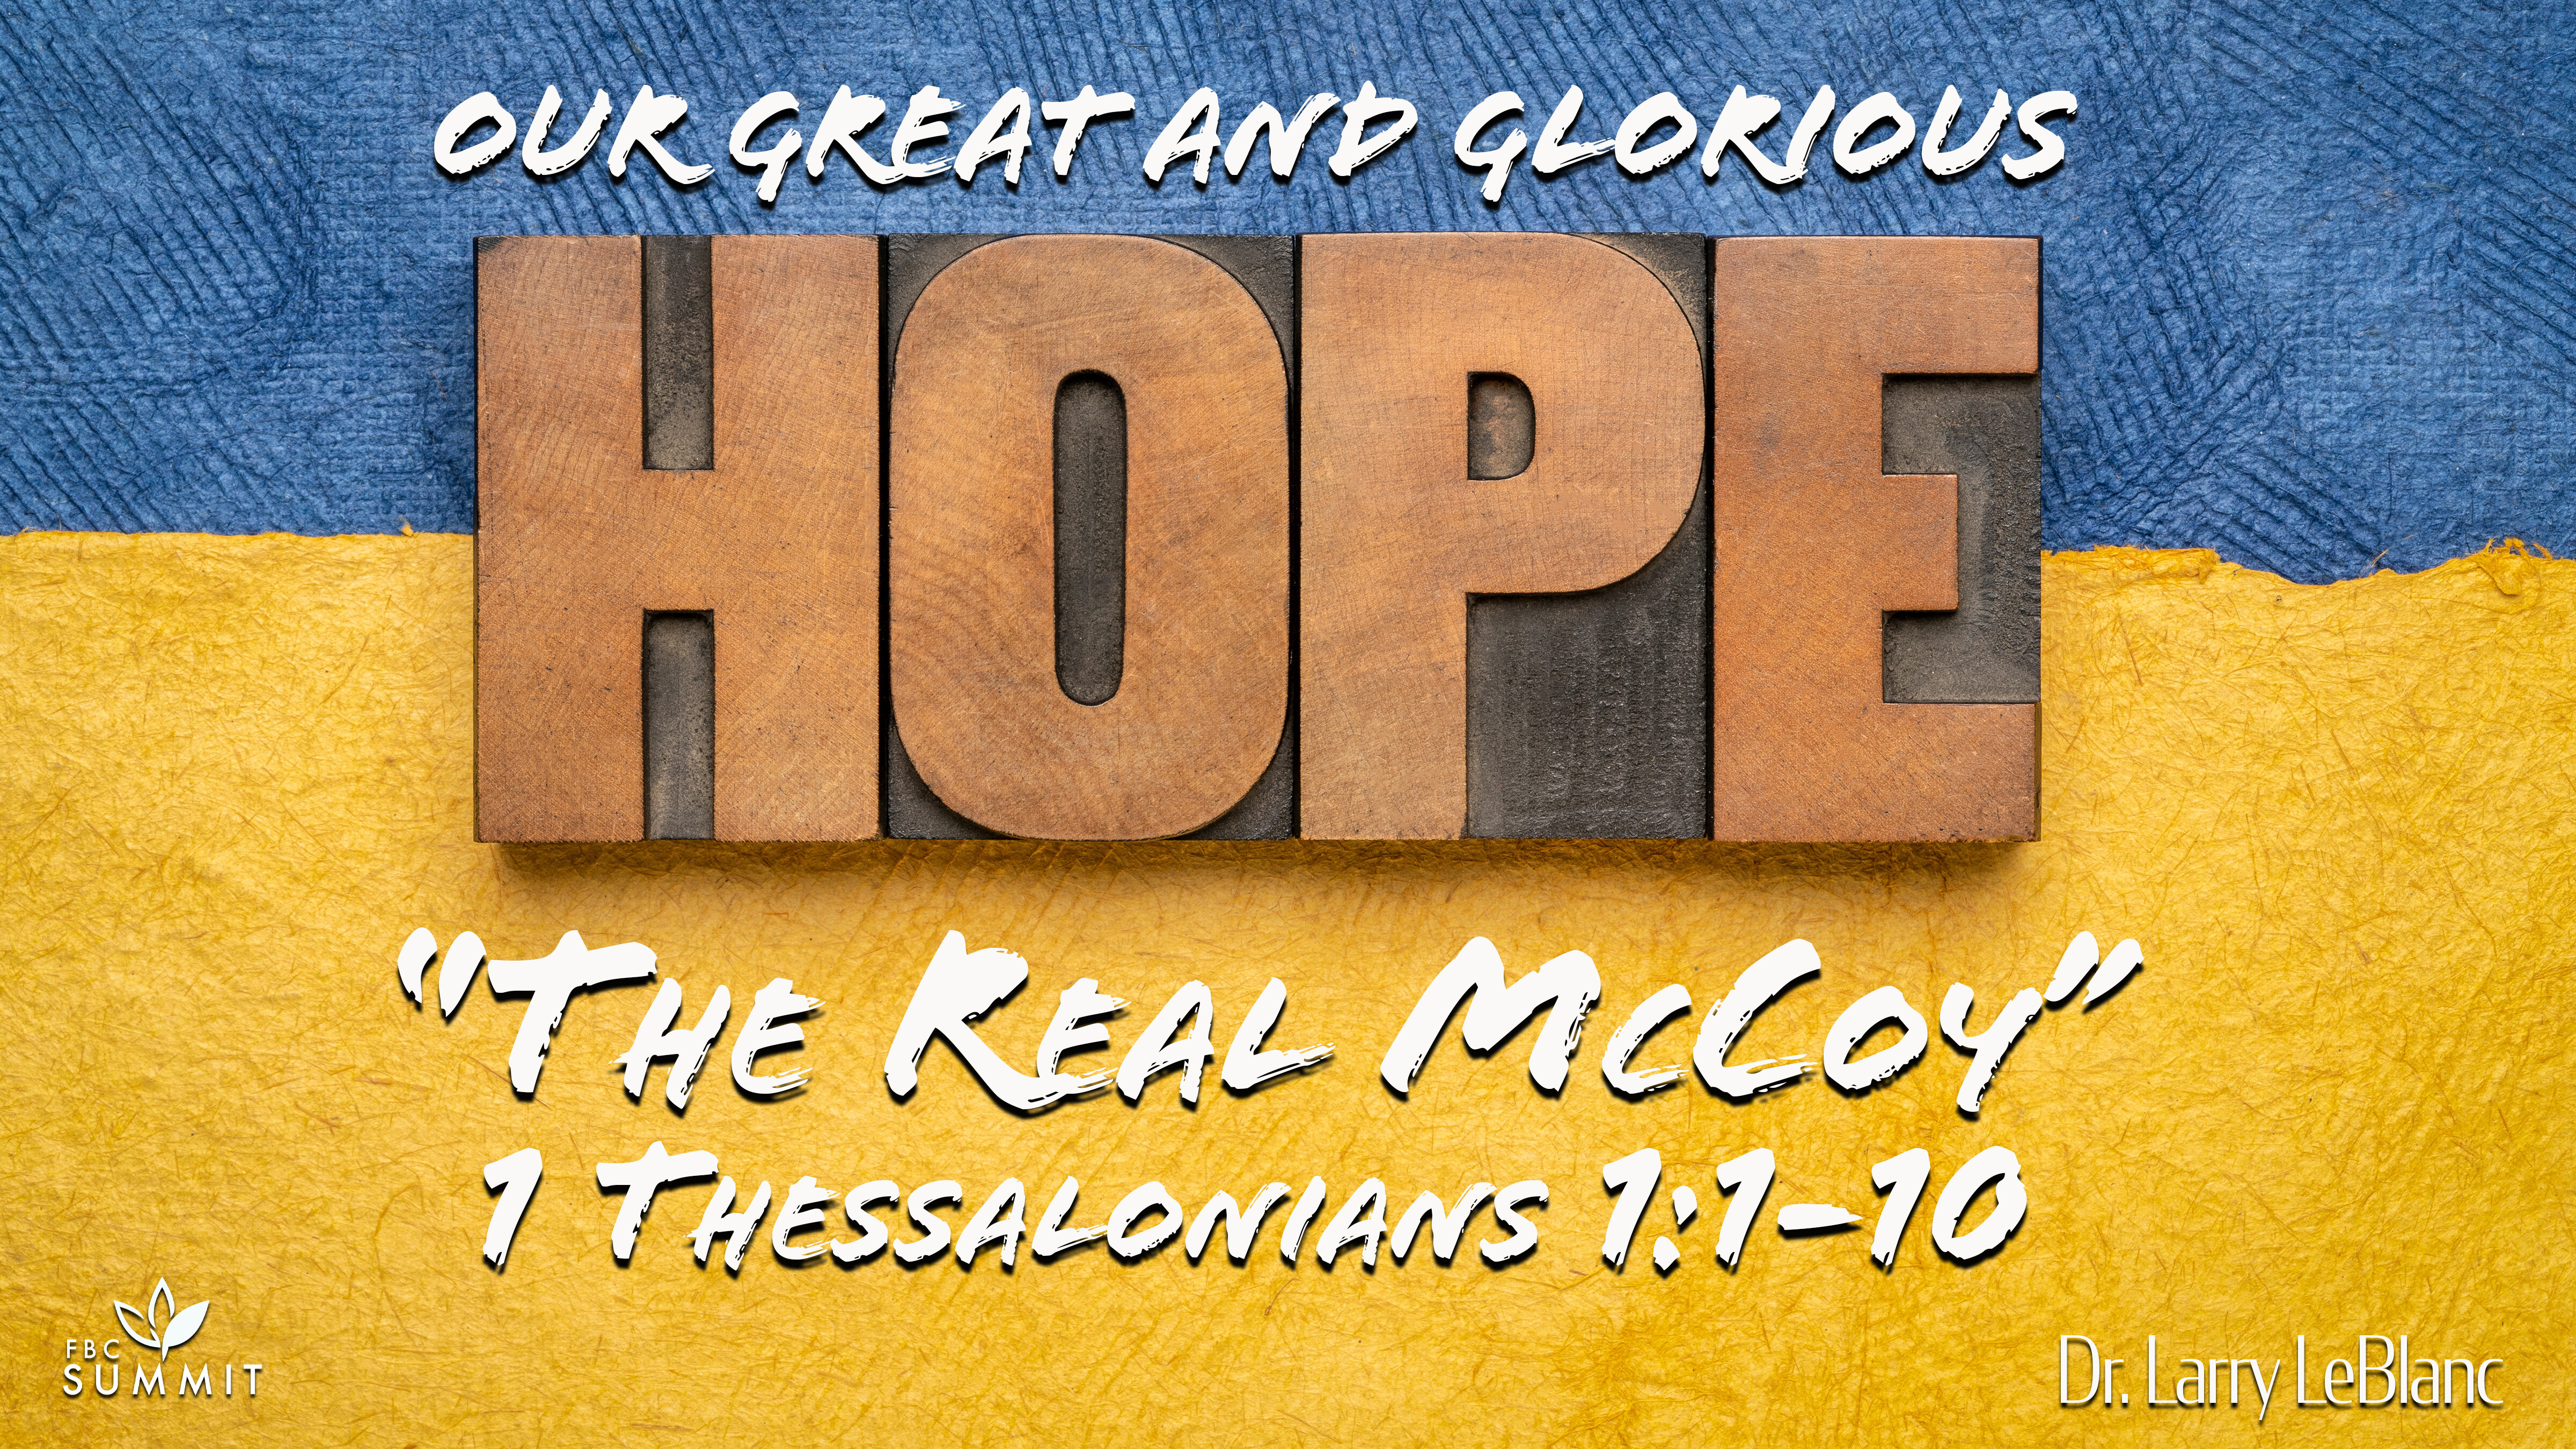 "The Real McCoy" 1 Thessalonians 1:1-10 // Dr. Larry LeBlanc